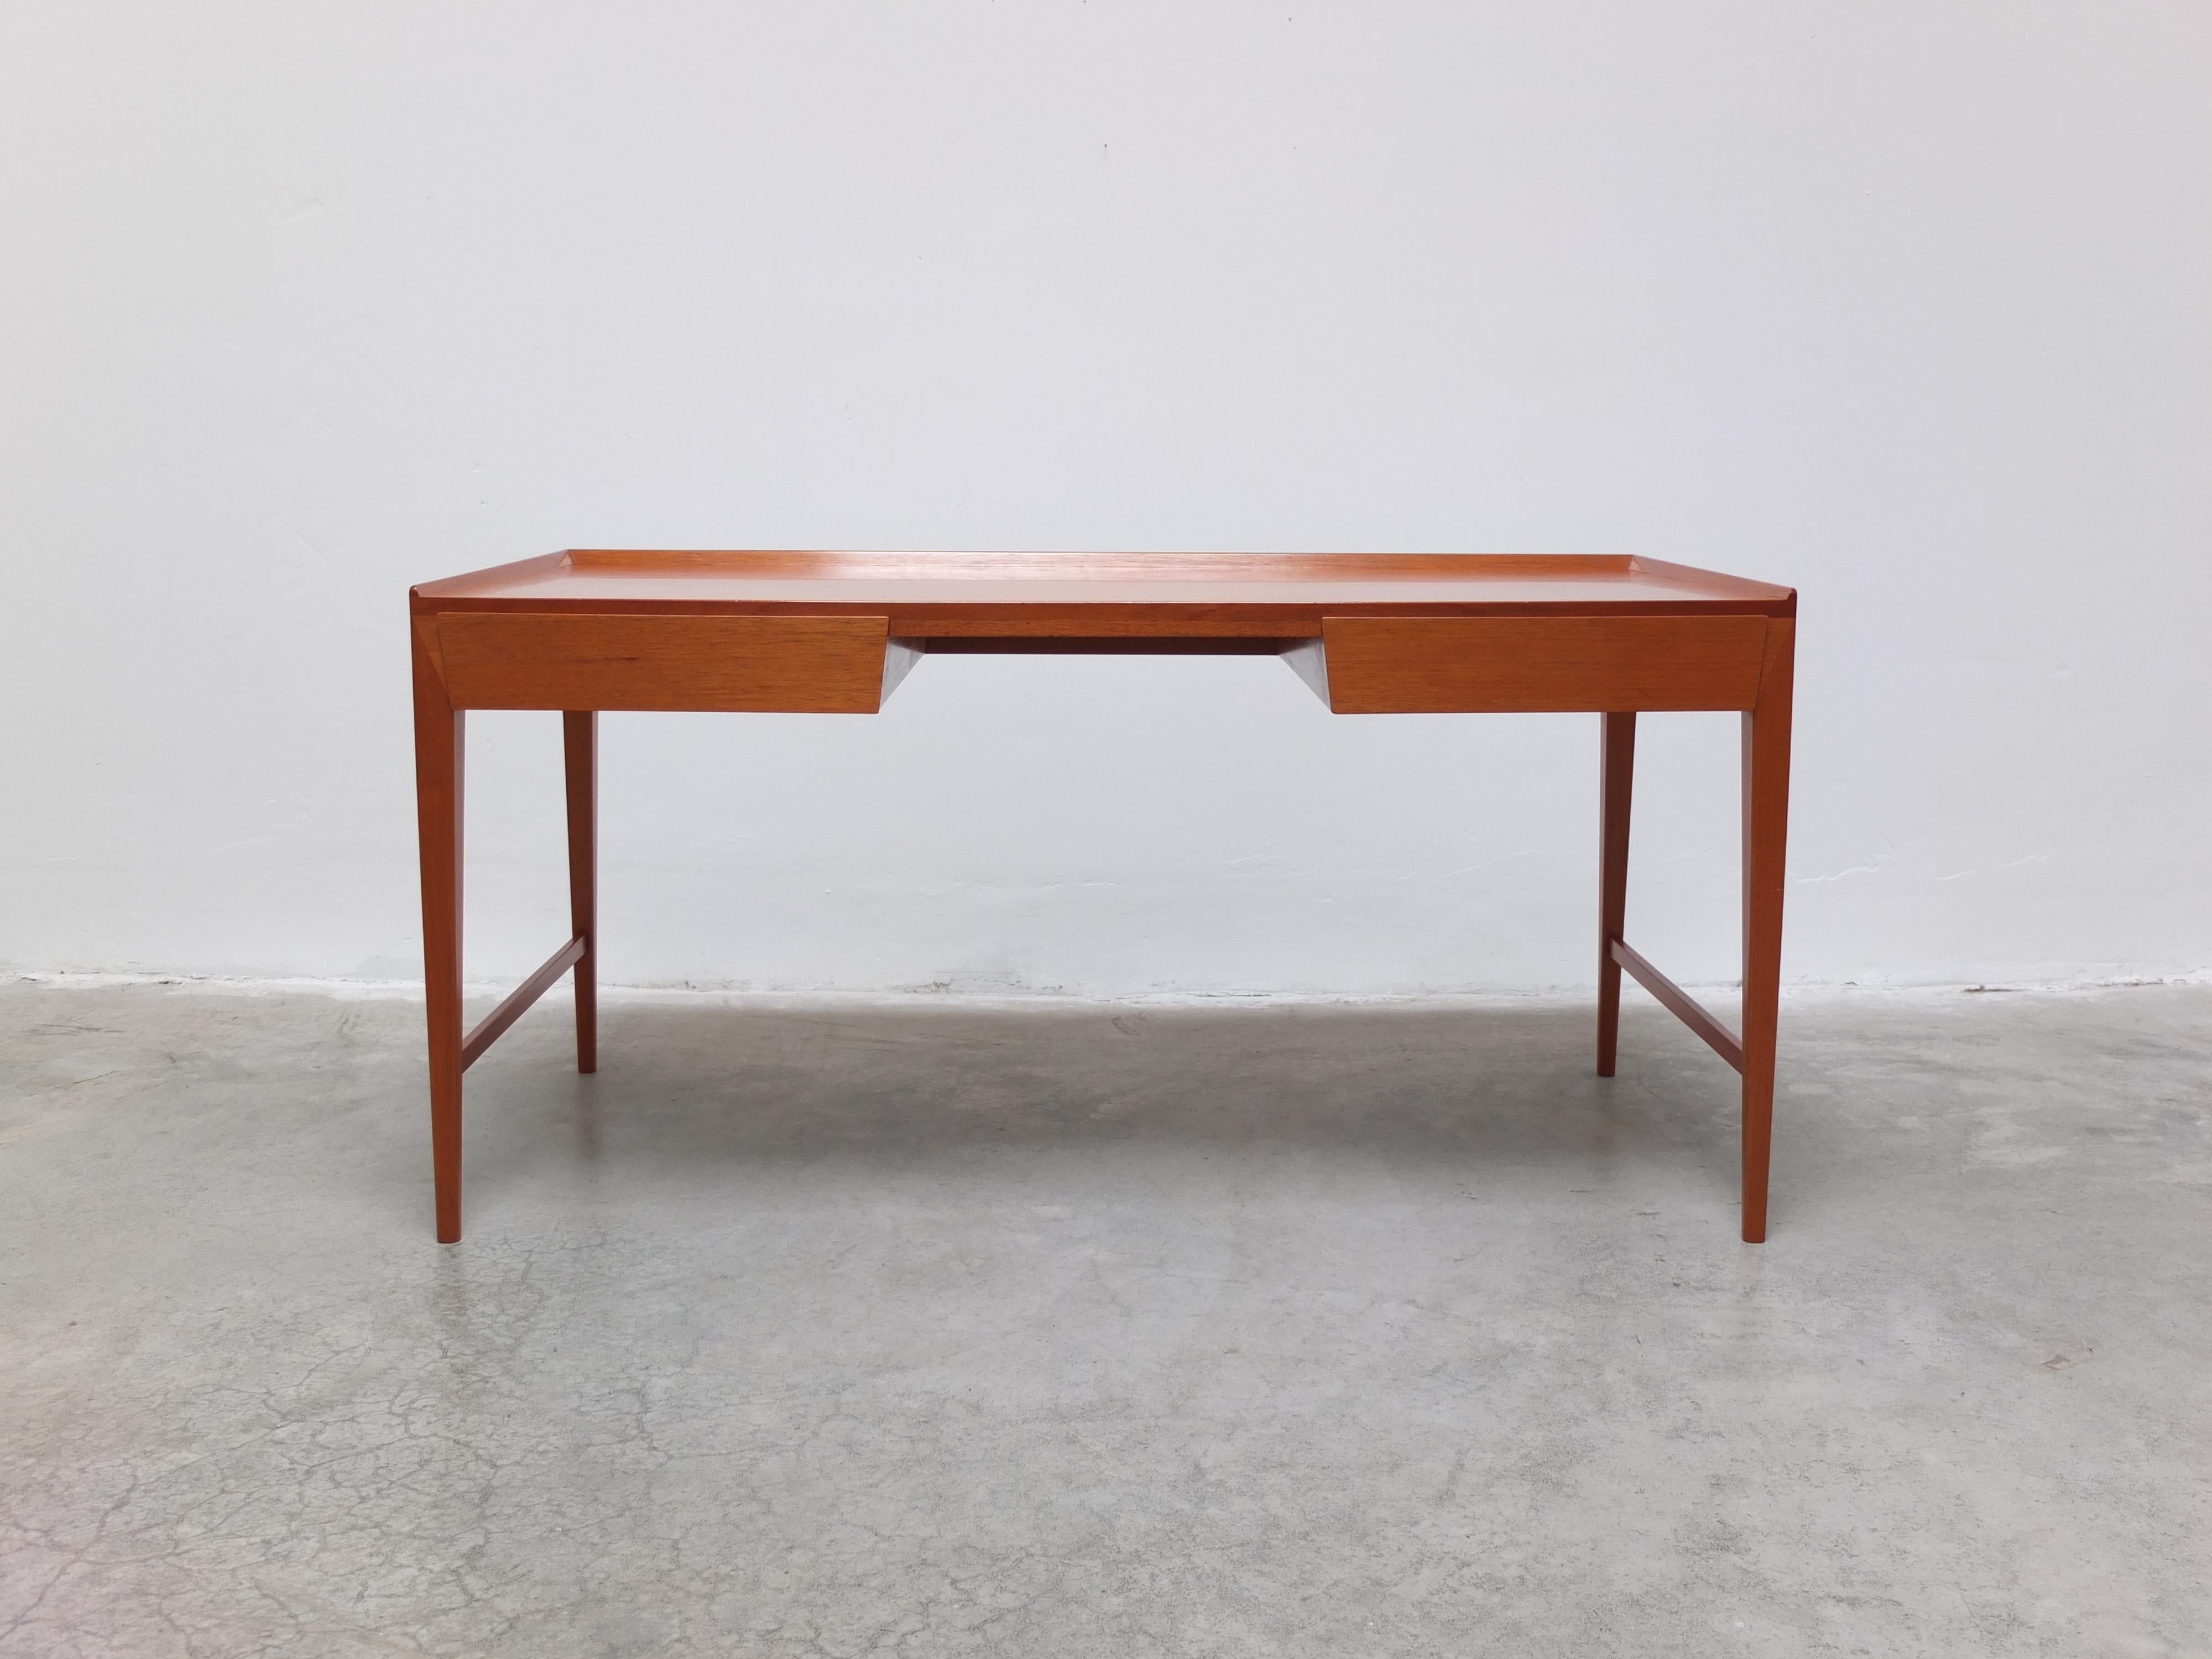 A very rare freestanding desk designed by Frode Holm around 1950. Ultra minimalist design with exceptional details and two elegant drawers executed in teak. Produced by Illums Bolighus in Denmark. Less is more.